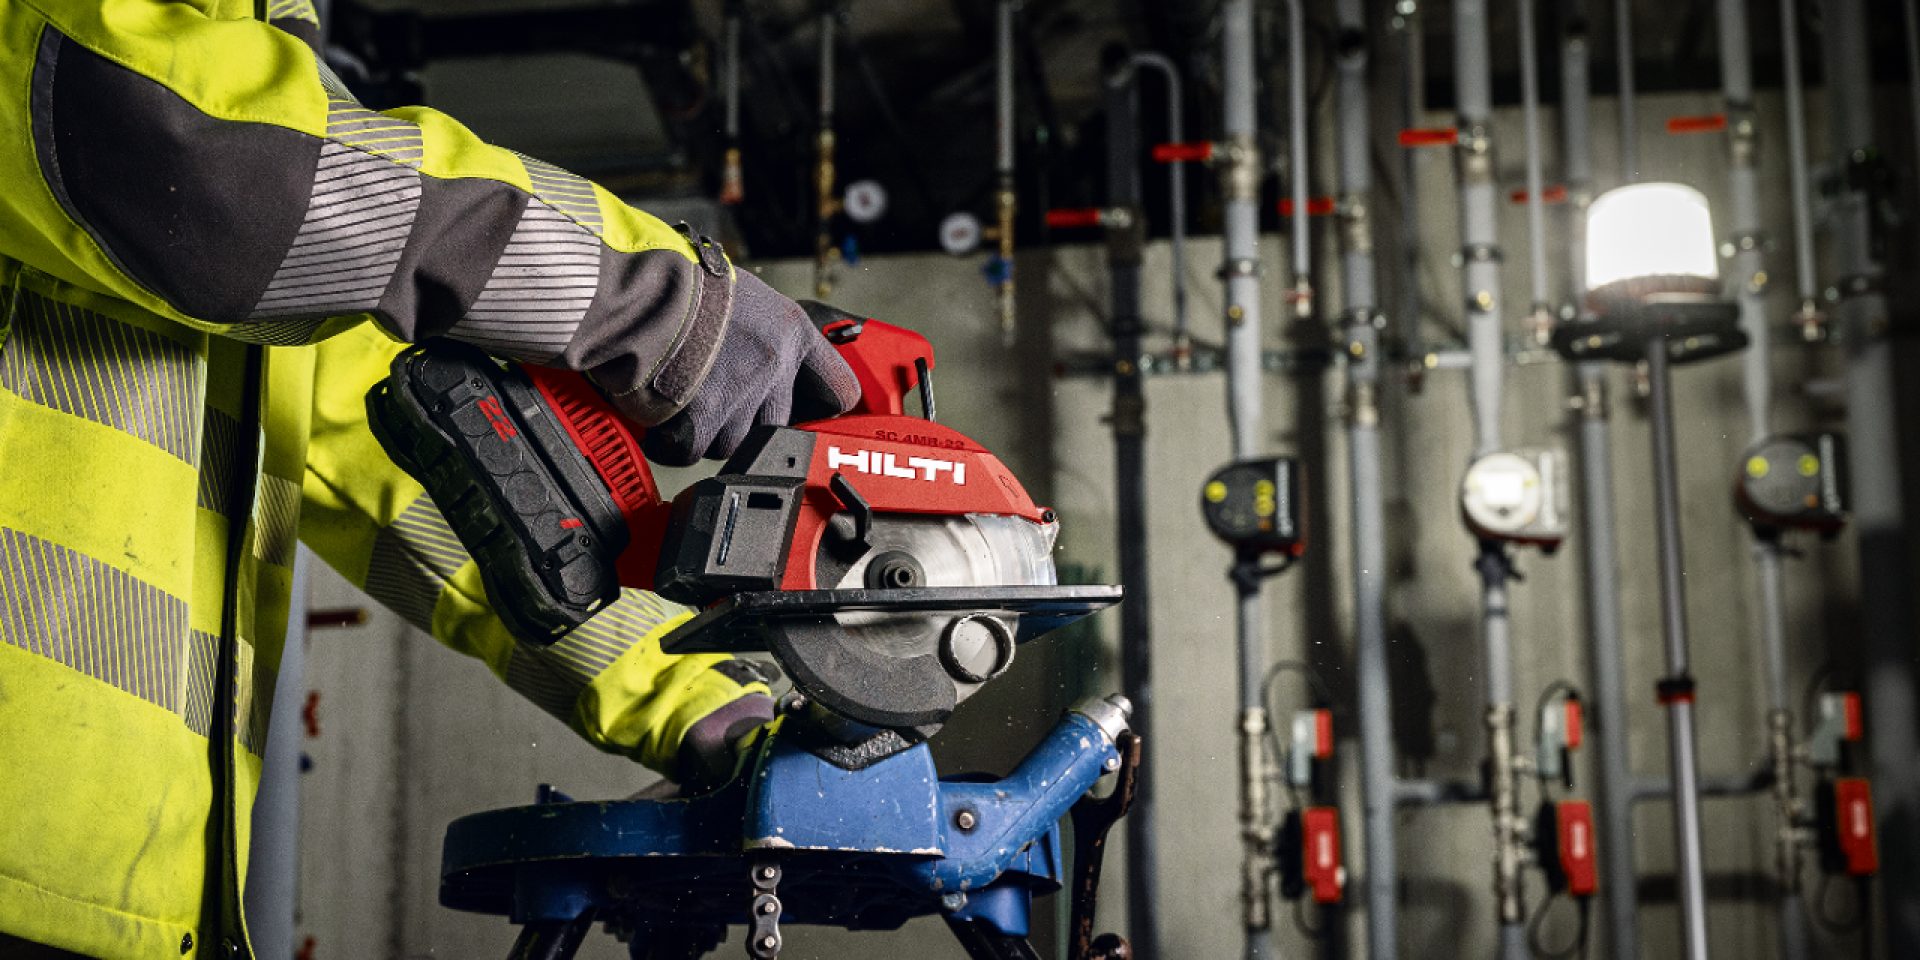 HILTI GROUP CONTINUES GROWTH IN A CHALLENGING ENVIRONMENT